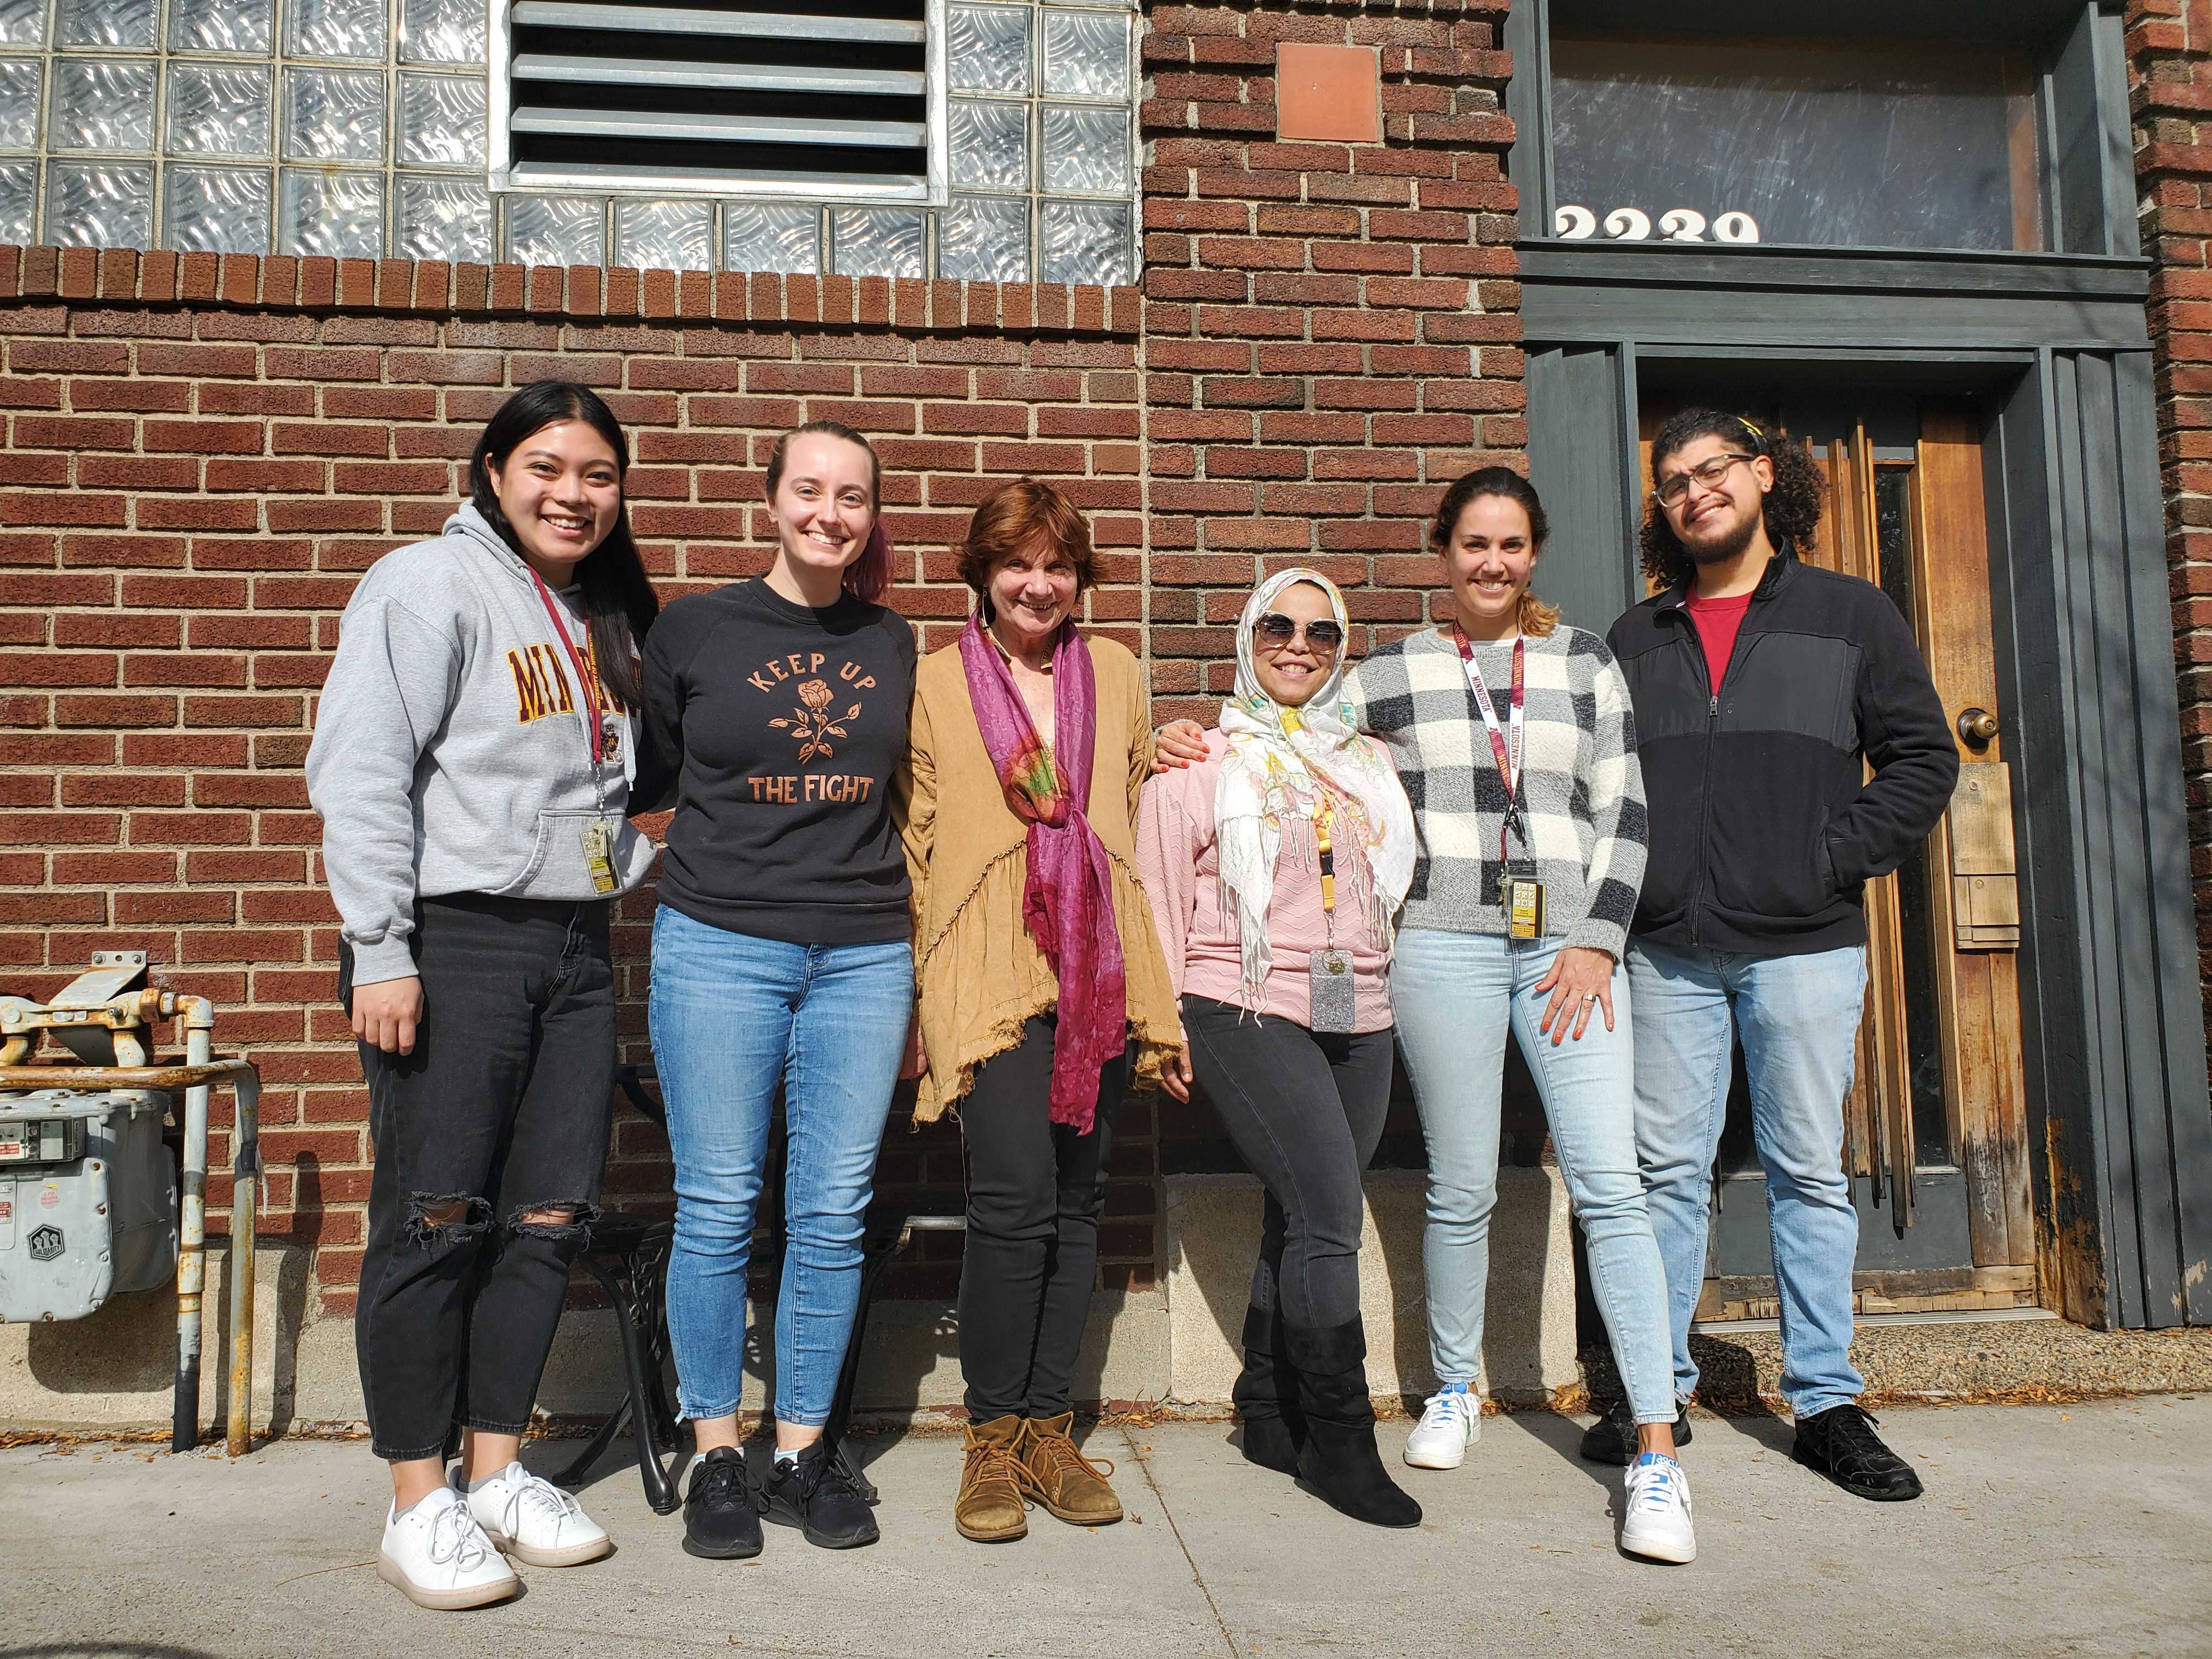 We went out to have lunch in the famous Finish bistro restaurant in Saint Paul. From left to right, Sydney Phu (rotation student), Mary Piaskowski, Dr. O'Connor, Hanen Baggar, Fernanda Fumuso and Alexis Cotto-Rosario. 